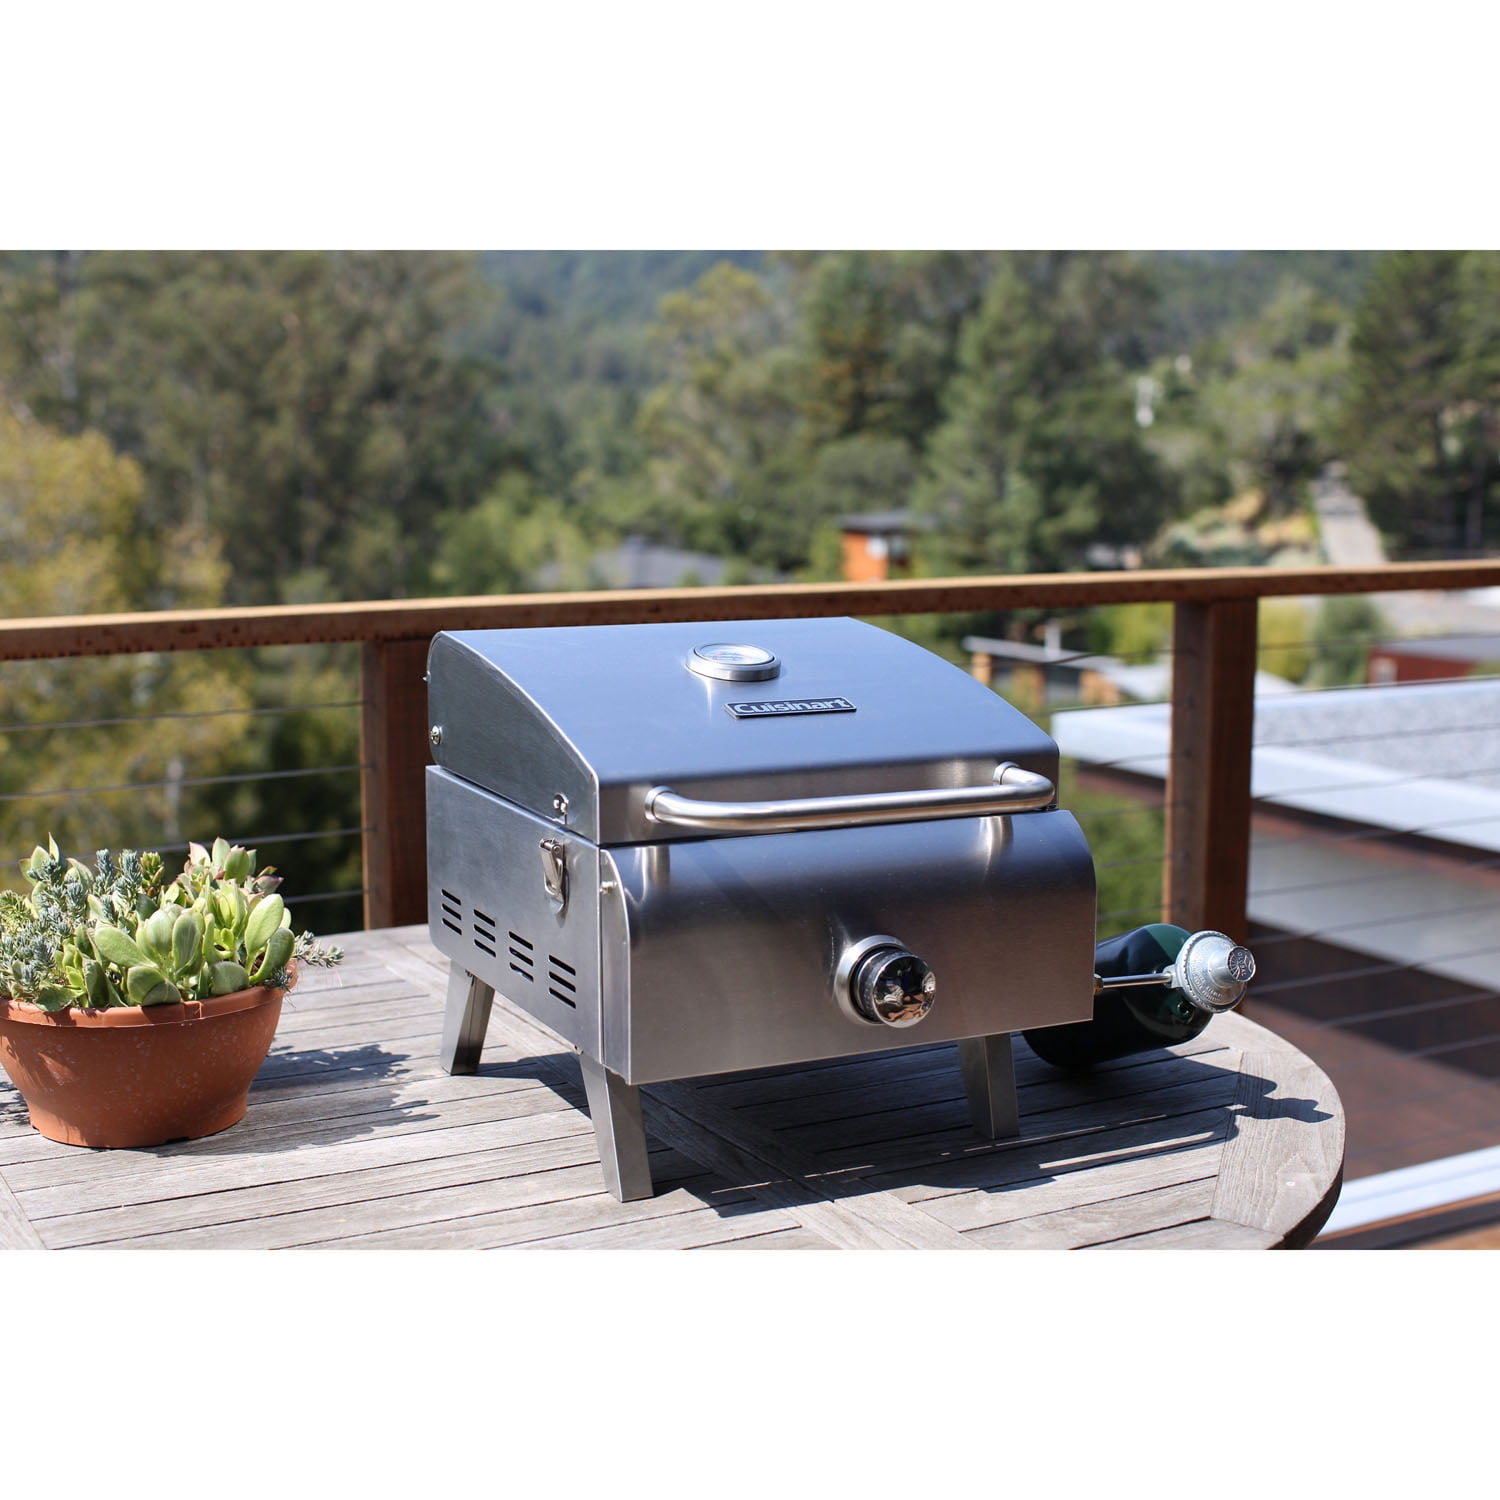 Cuisinart Portable Stainless Steel Propane Grill - 146 Sq In